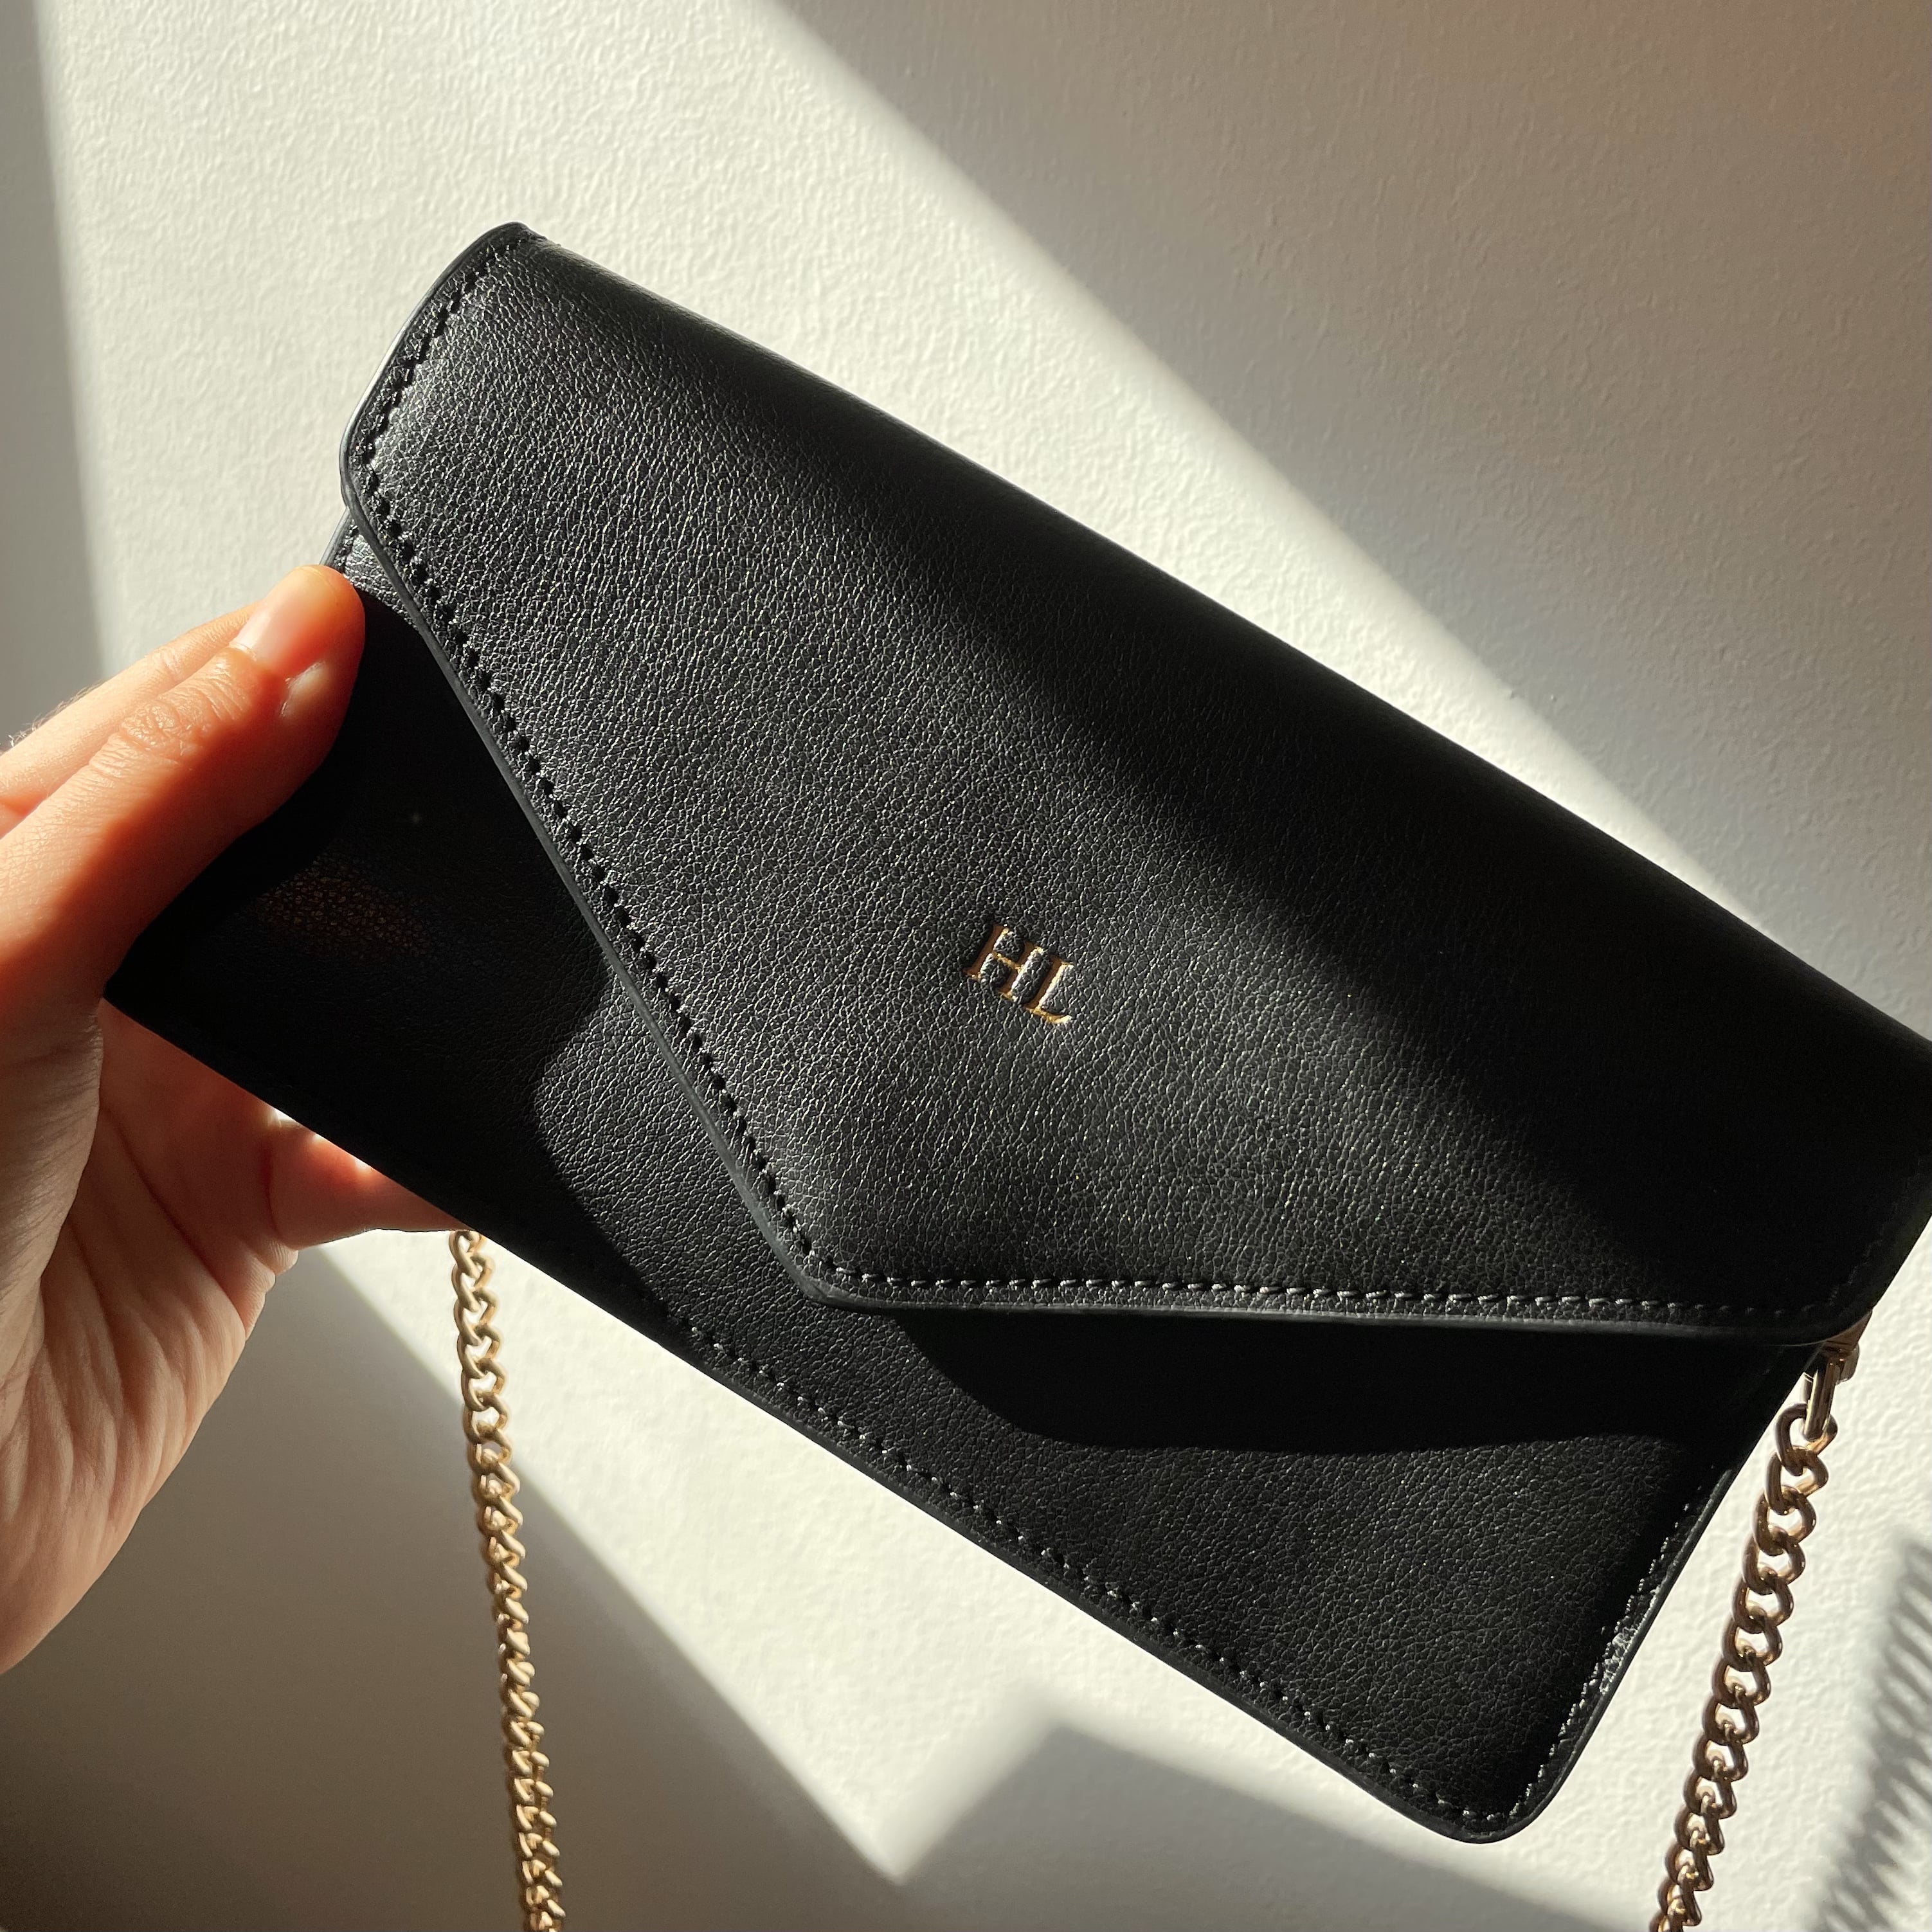 Moment Crossbody Wallet Review